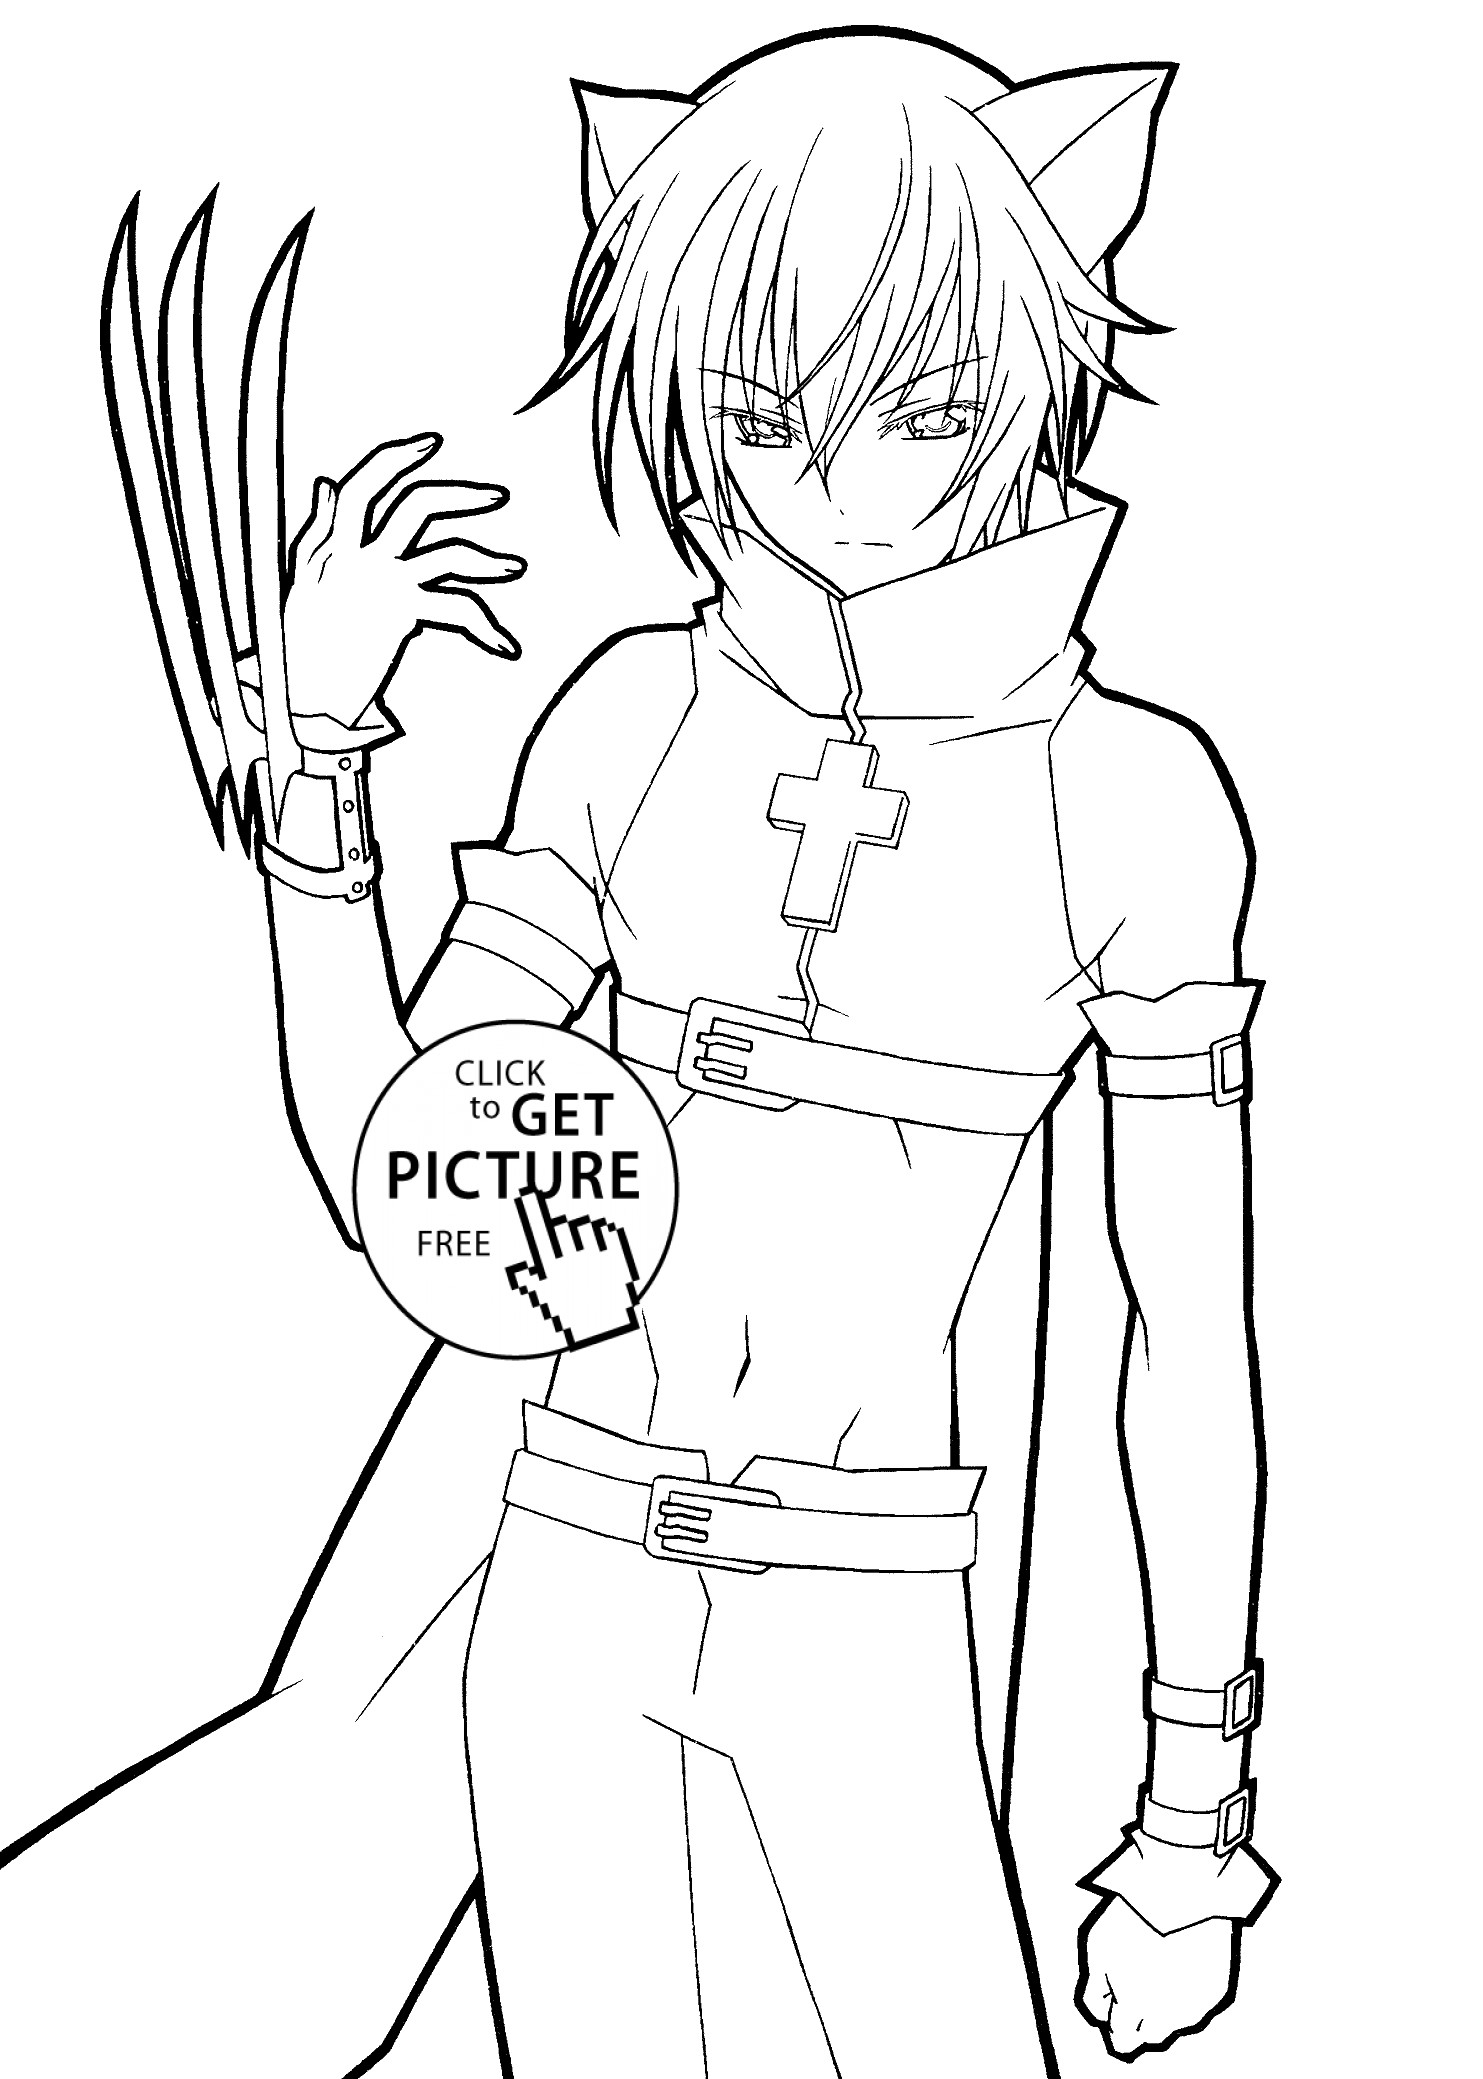 Anime Coloring Pages Boys
 Shugo chara catman anime coloring pages for kids